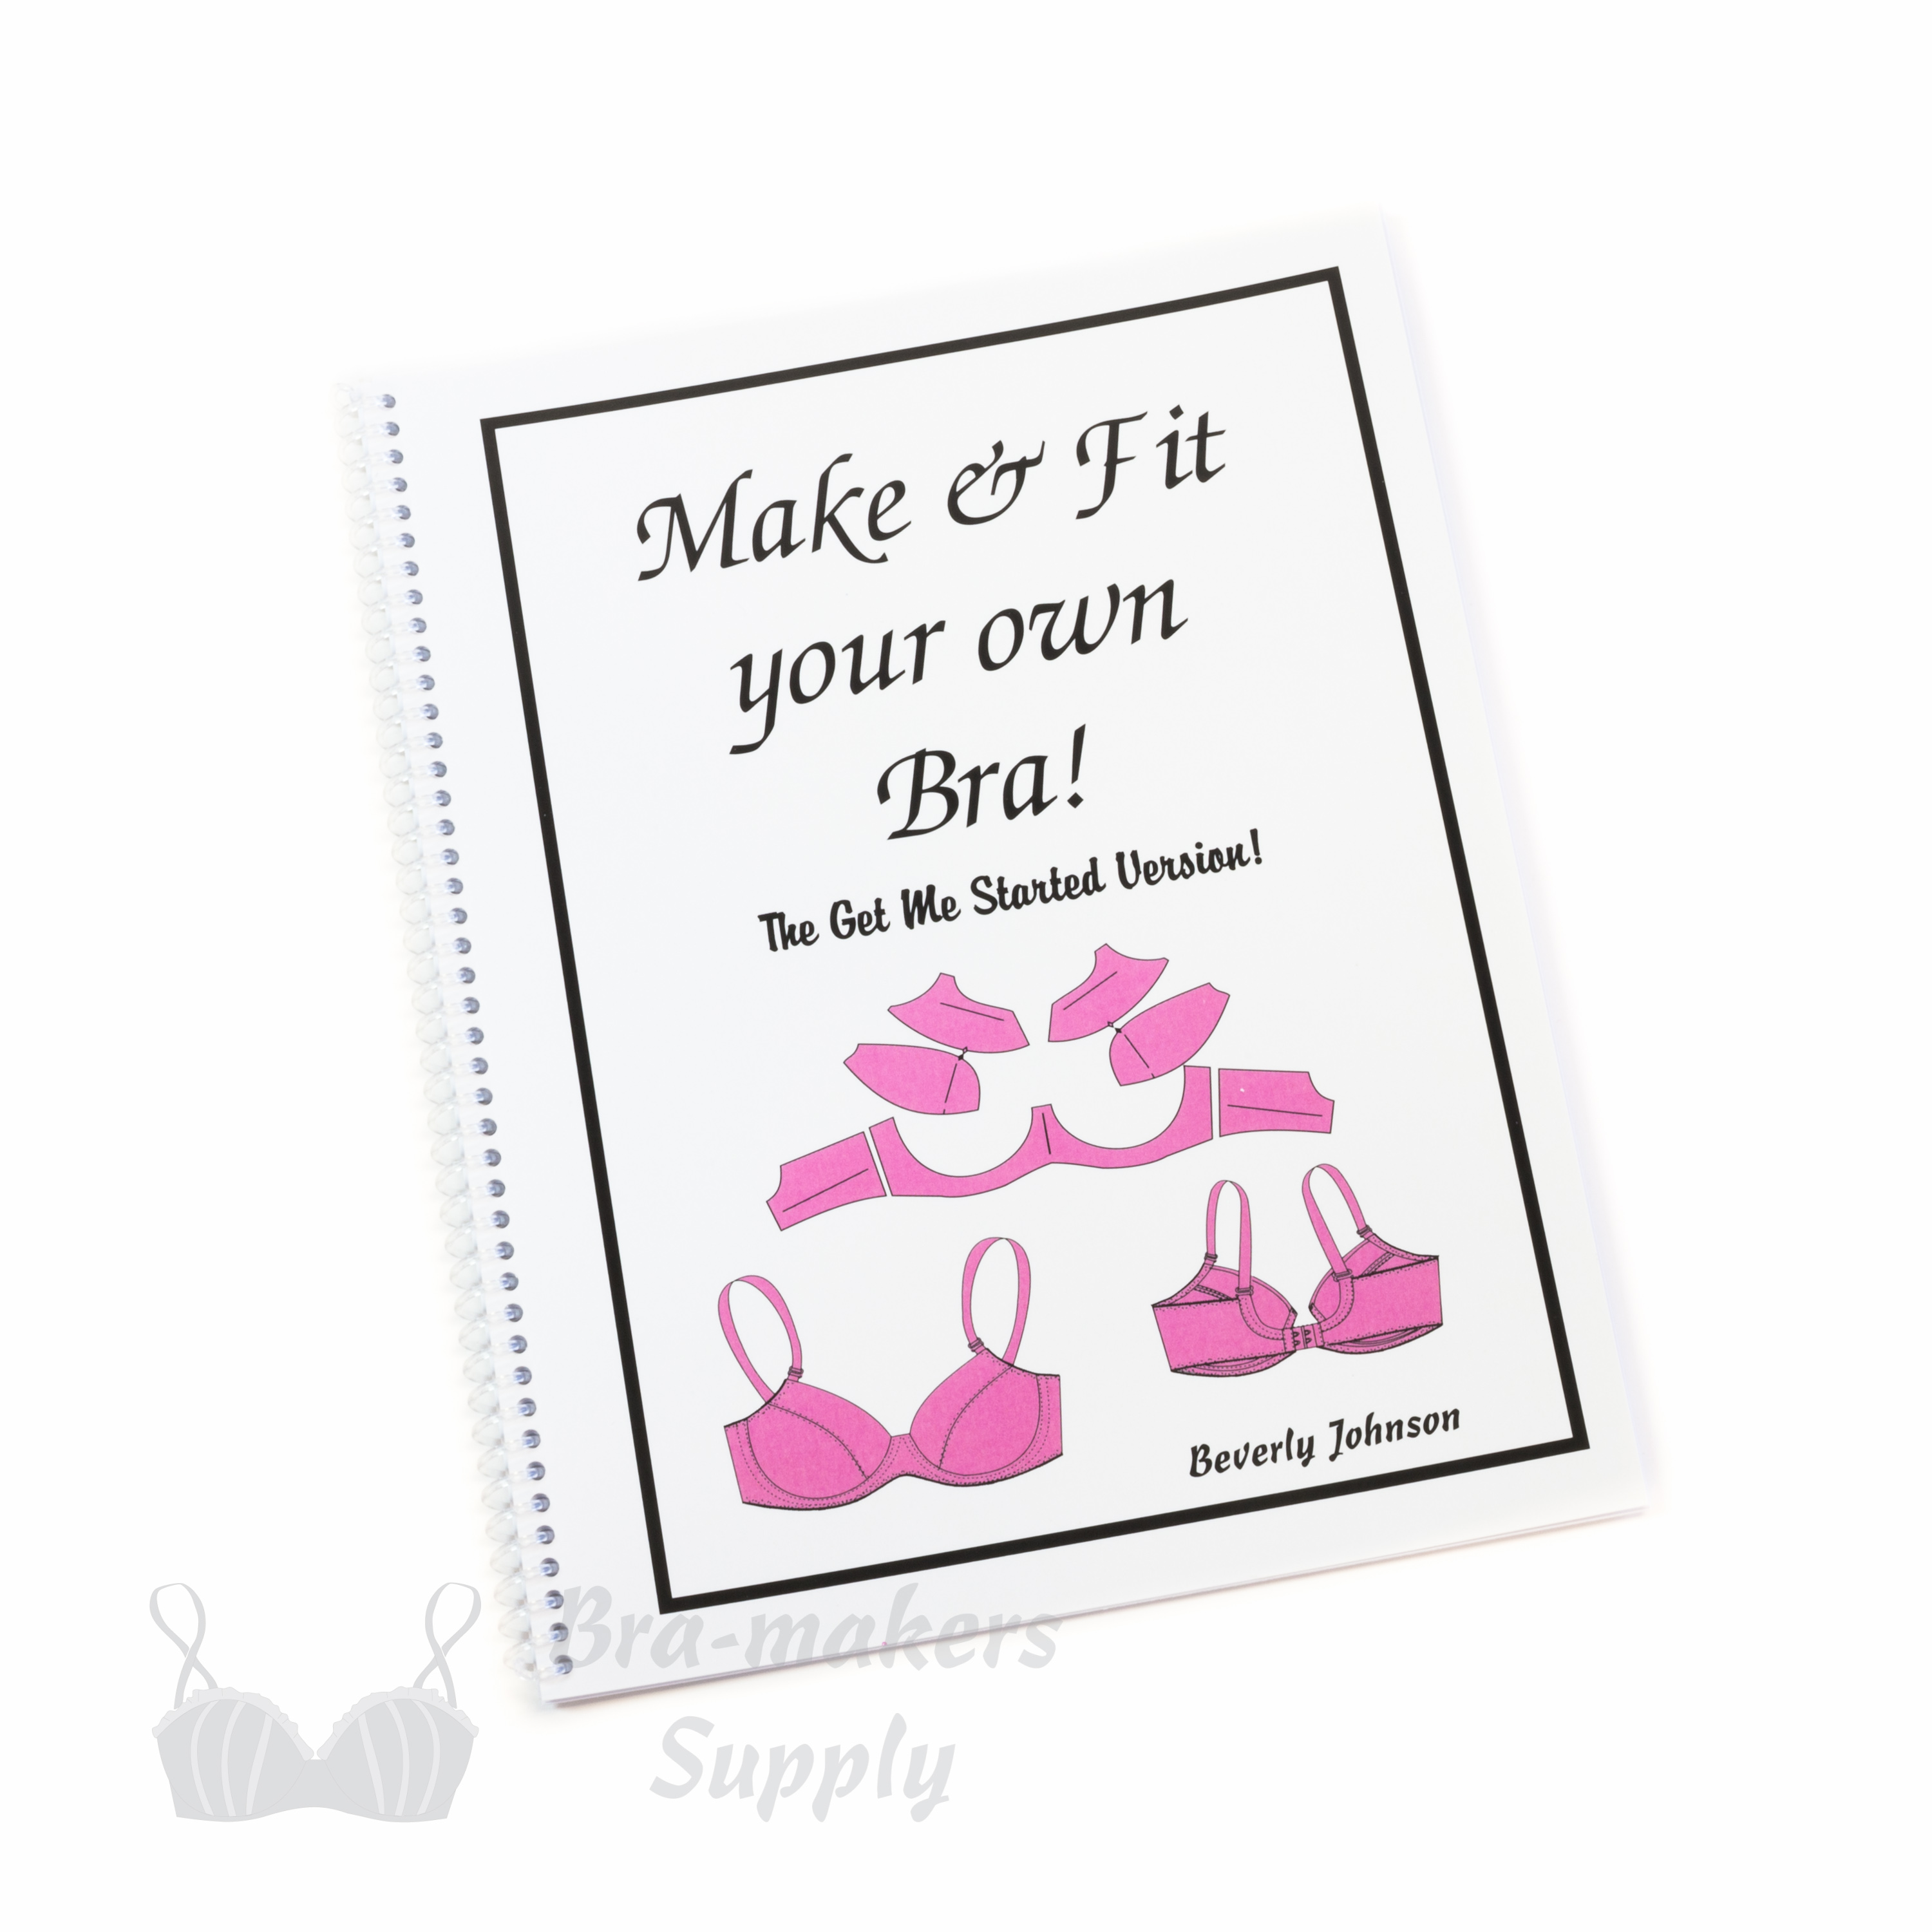 Make & Fit your own Bra Book - learn bra-making - Bra-Makers Supply